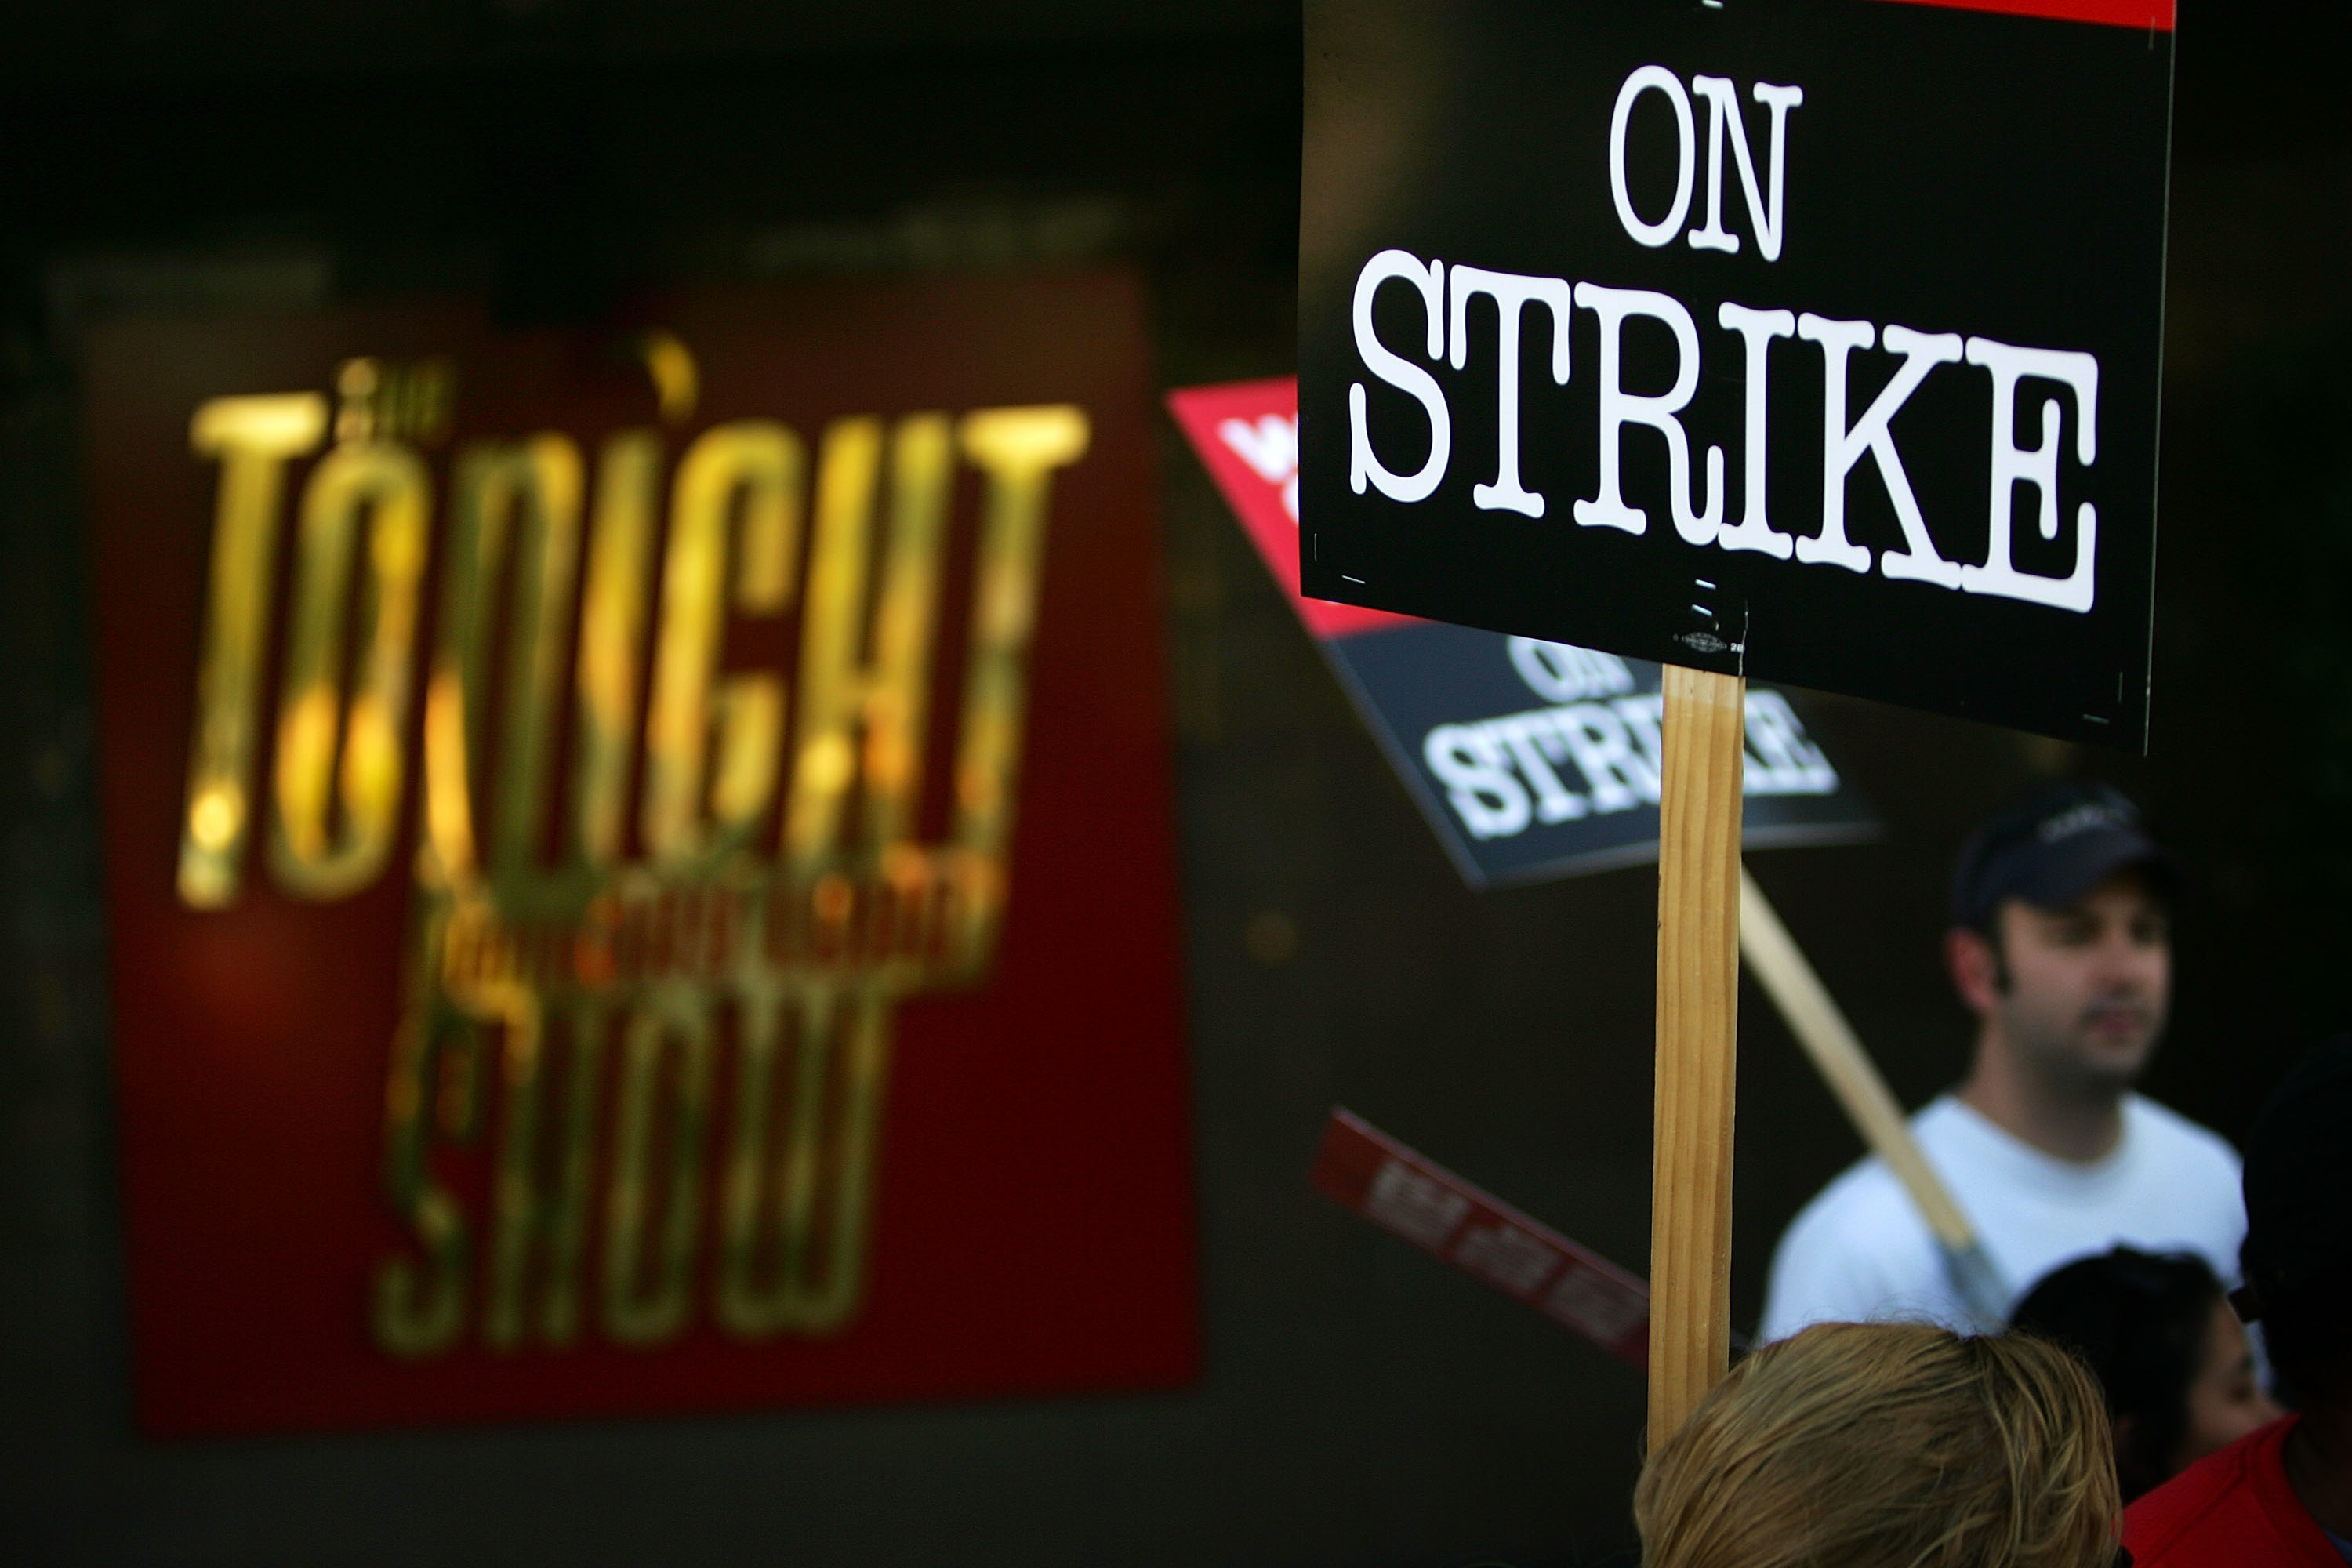 A man in a white shirt holds a sign reading “On strike” in front of a theater with the Tonight Show logo on it.